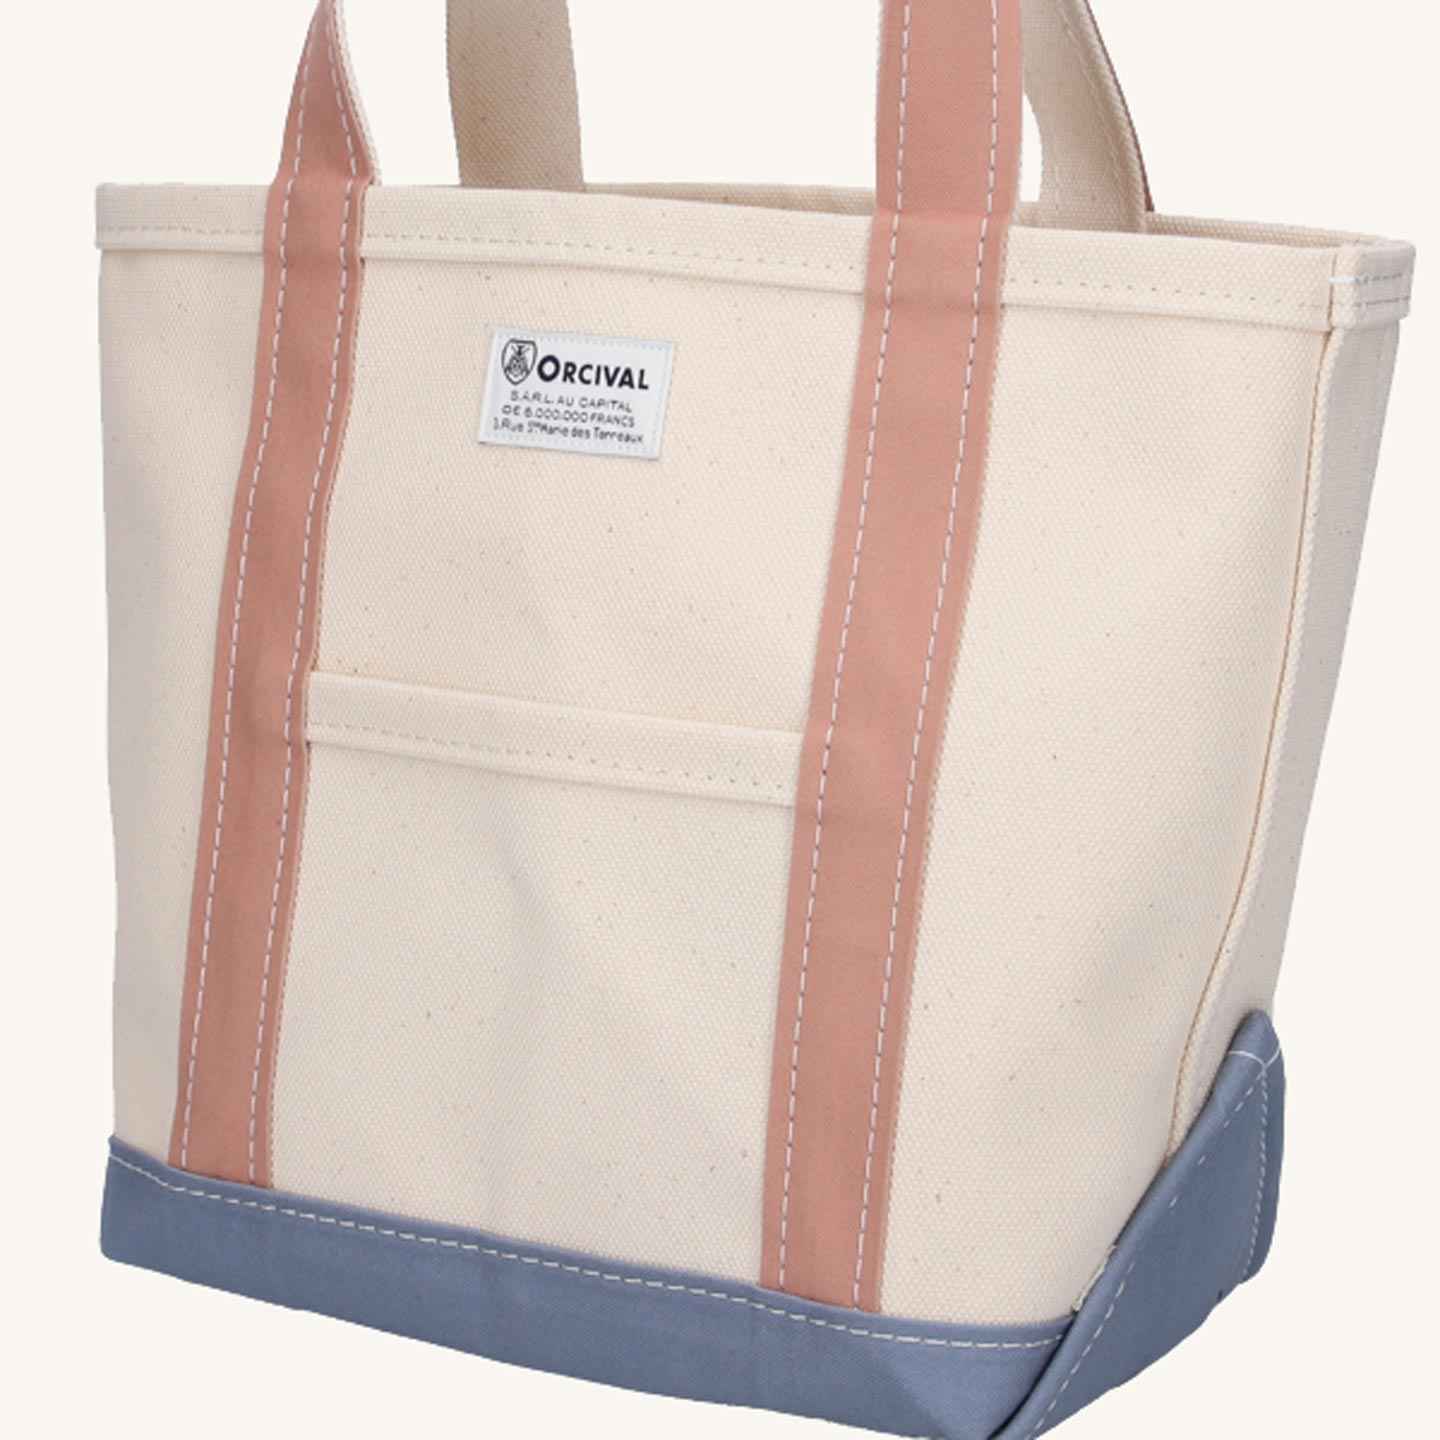 The Ecru / Smocky Pink / Greyish Blue tote bag, in a medium size, by Orcival